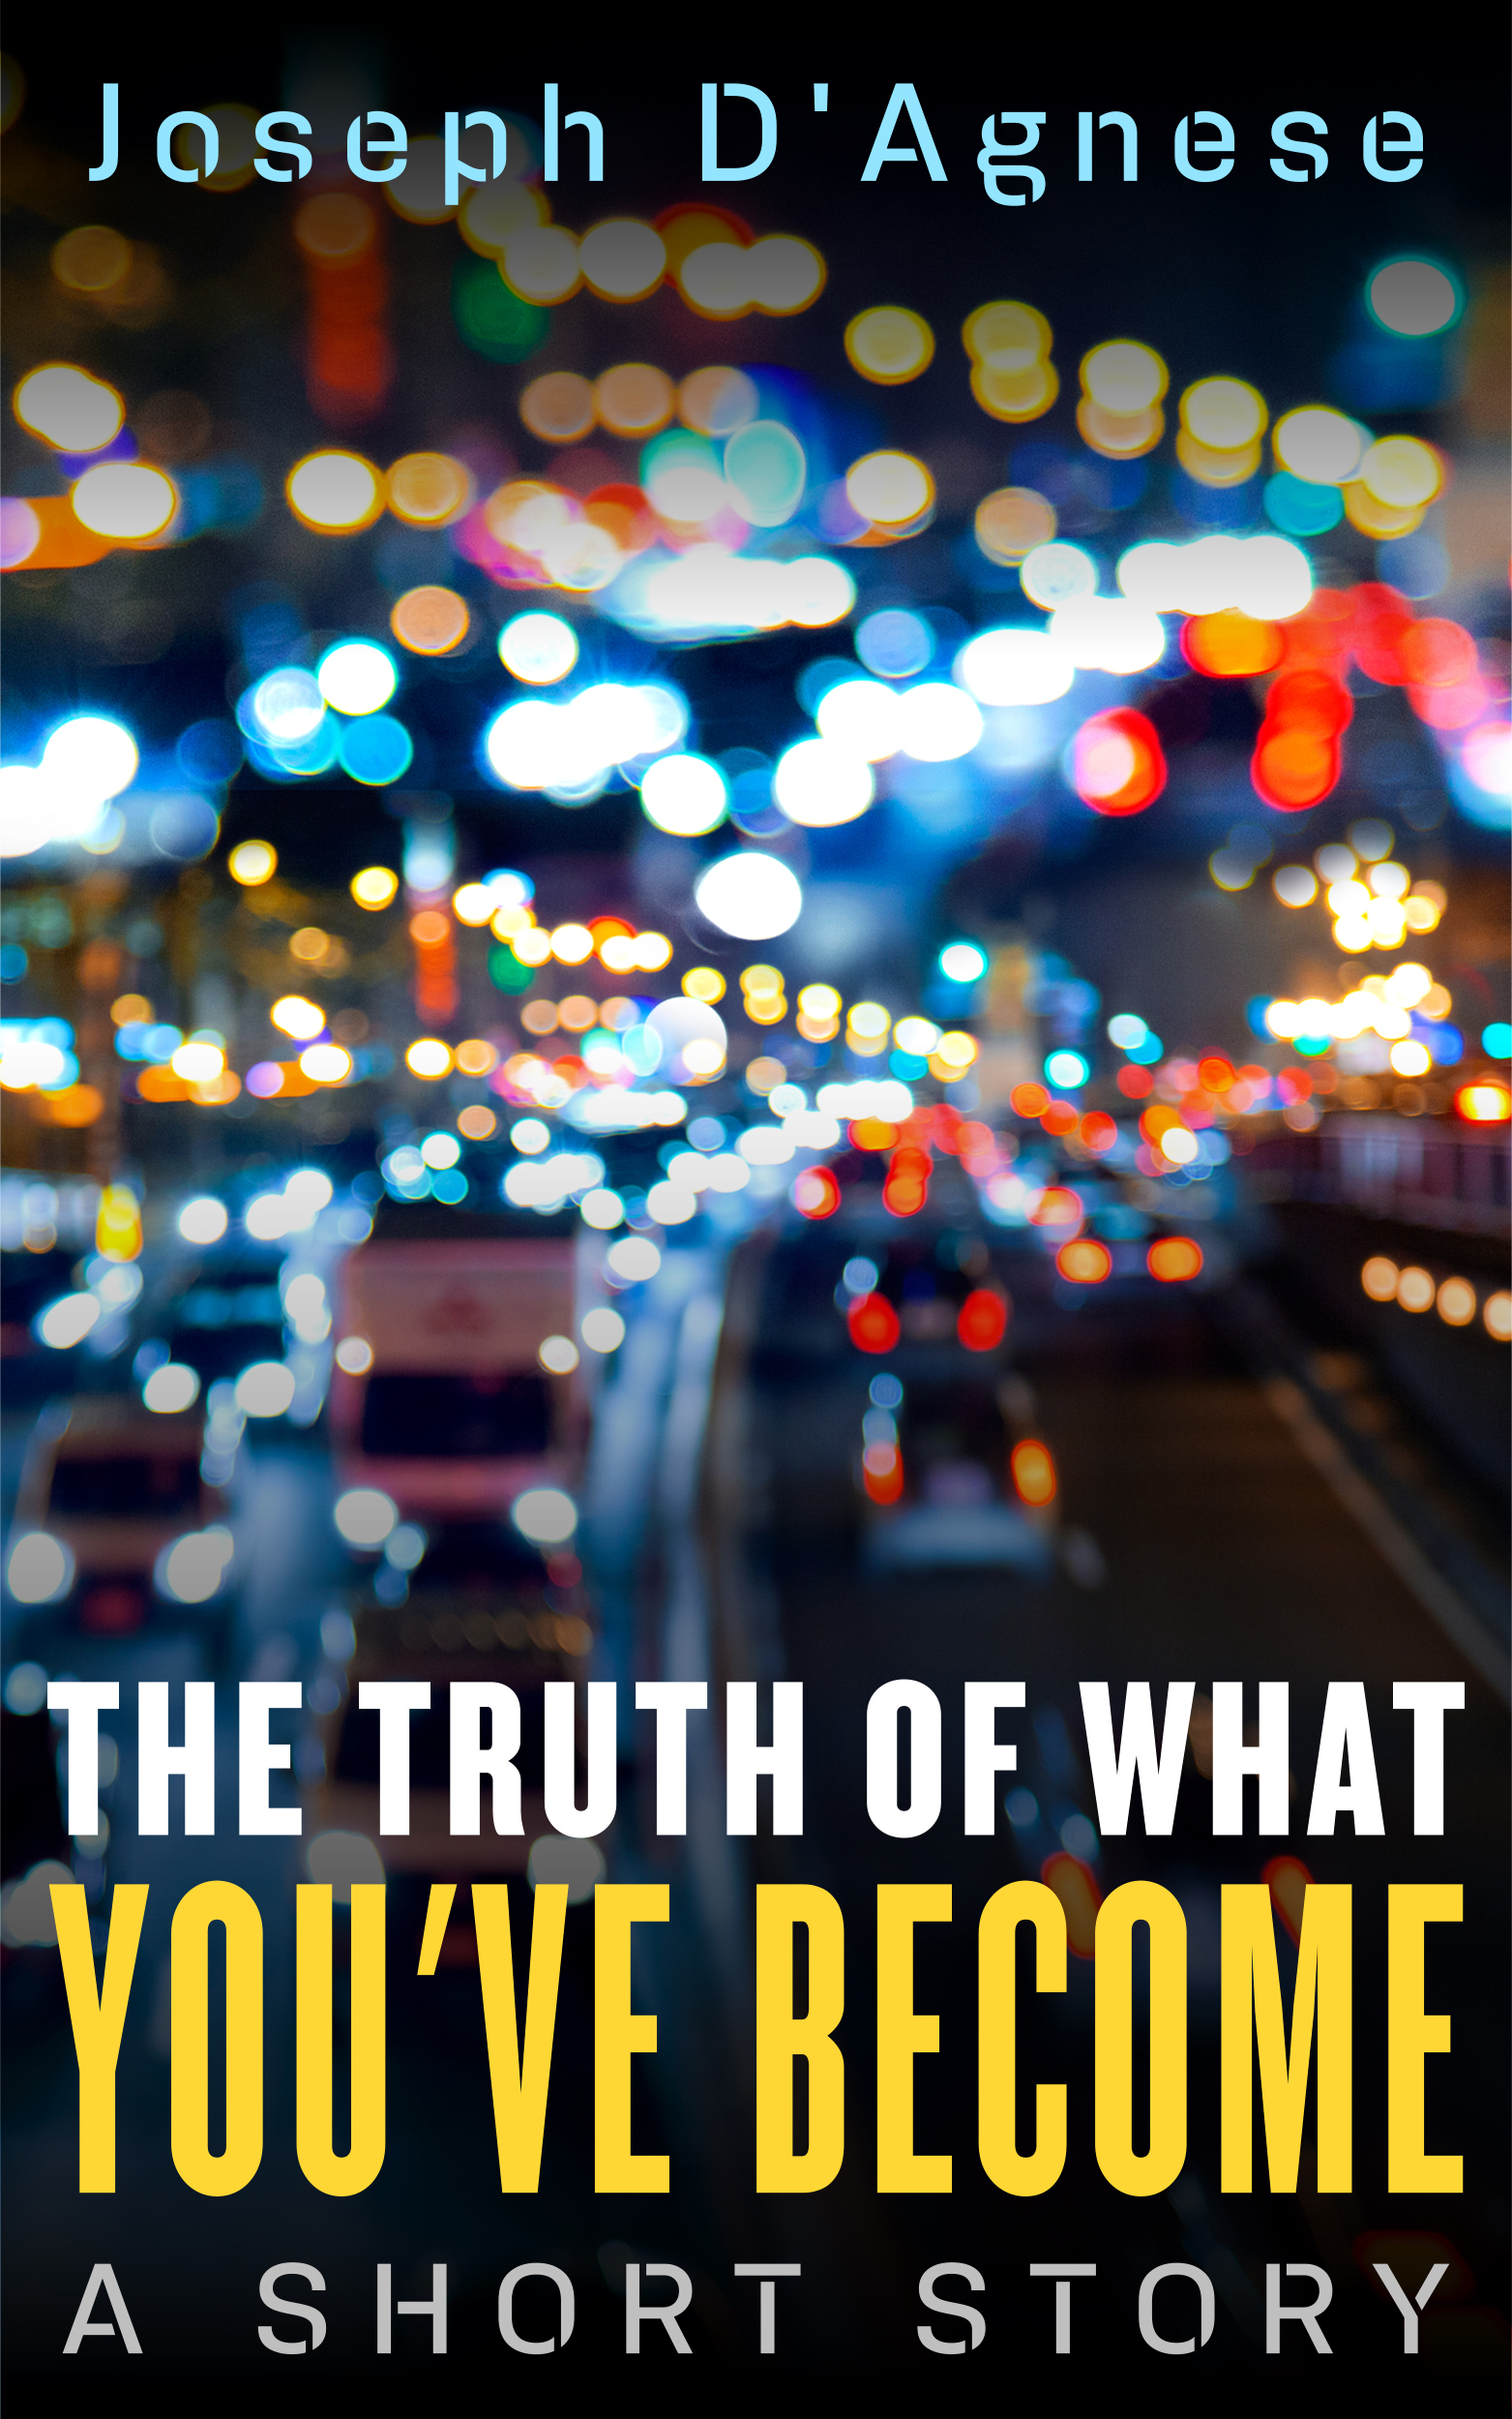 The Truth of What You've Become by Joseph D'Agnese